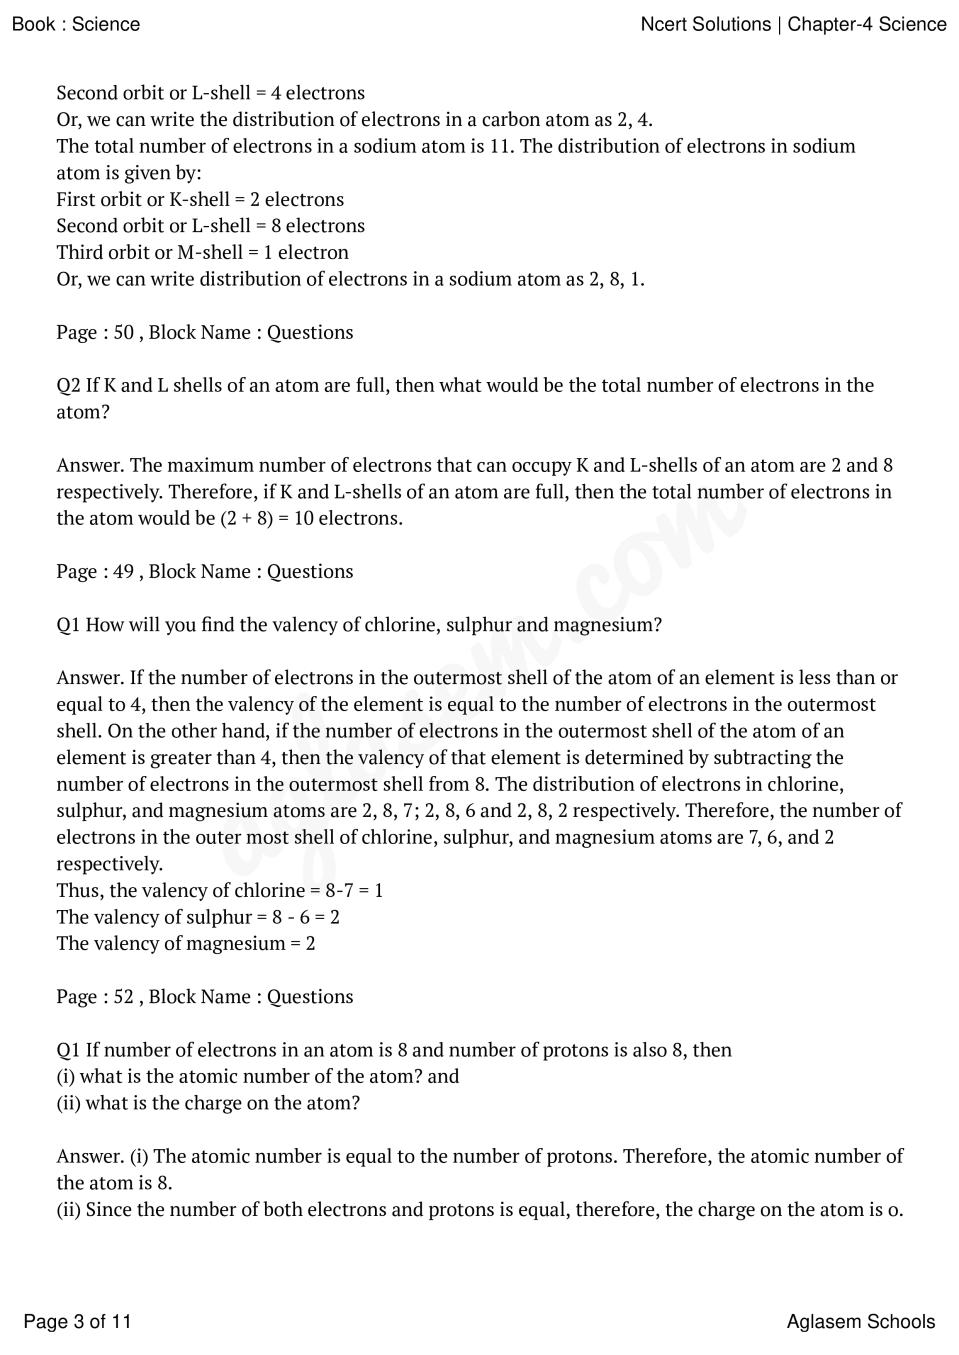 cbse class 9 science chapter 4 case study questions